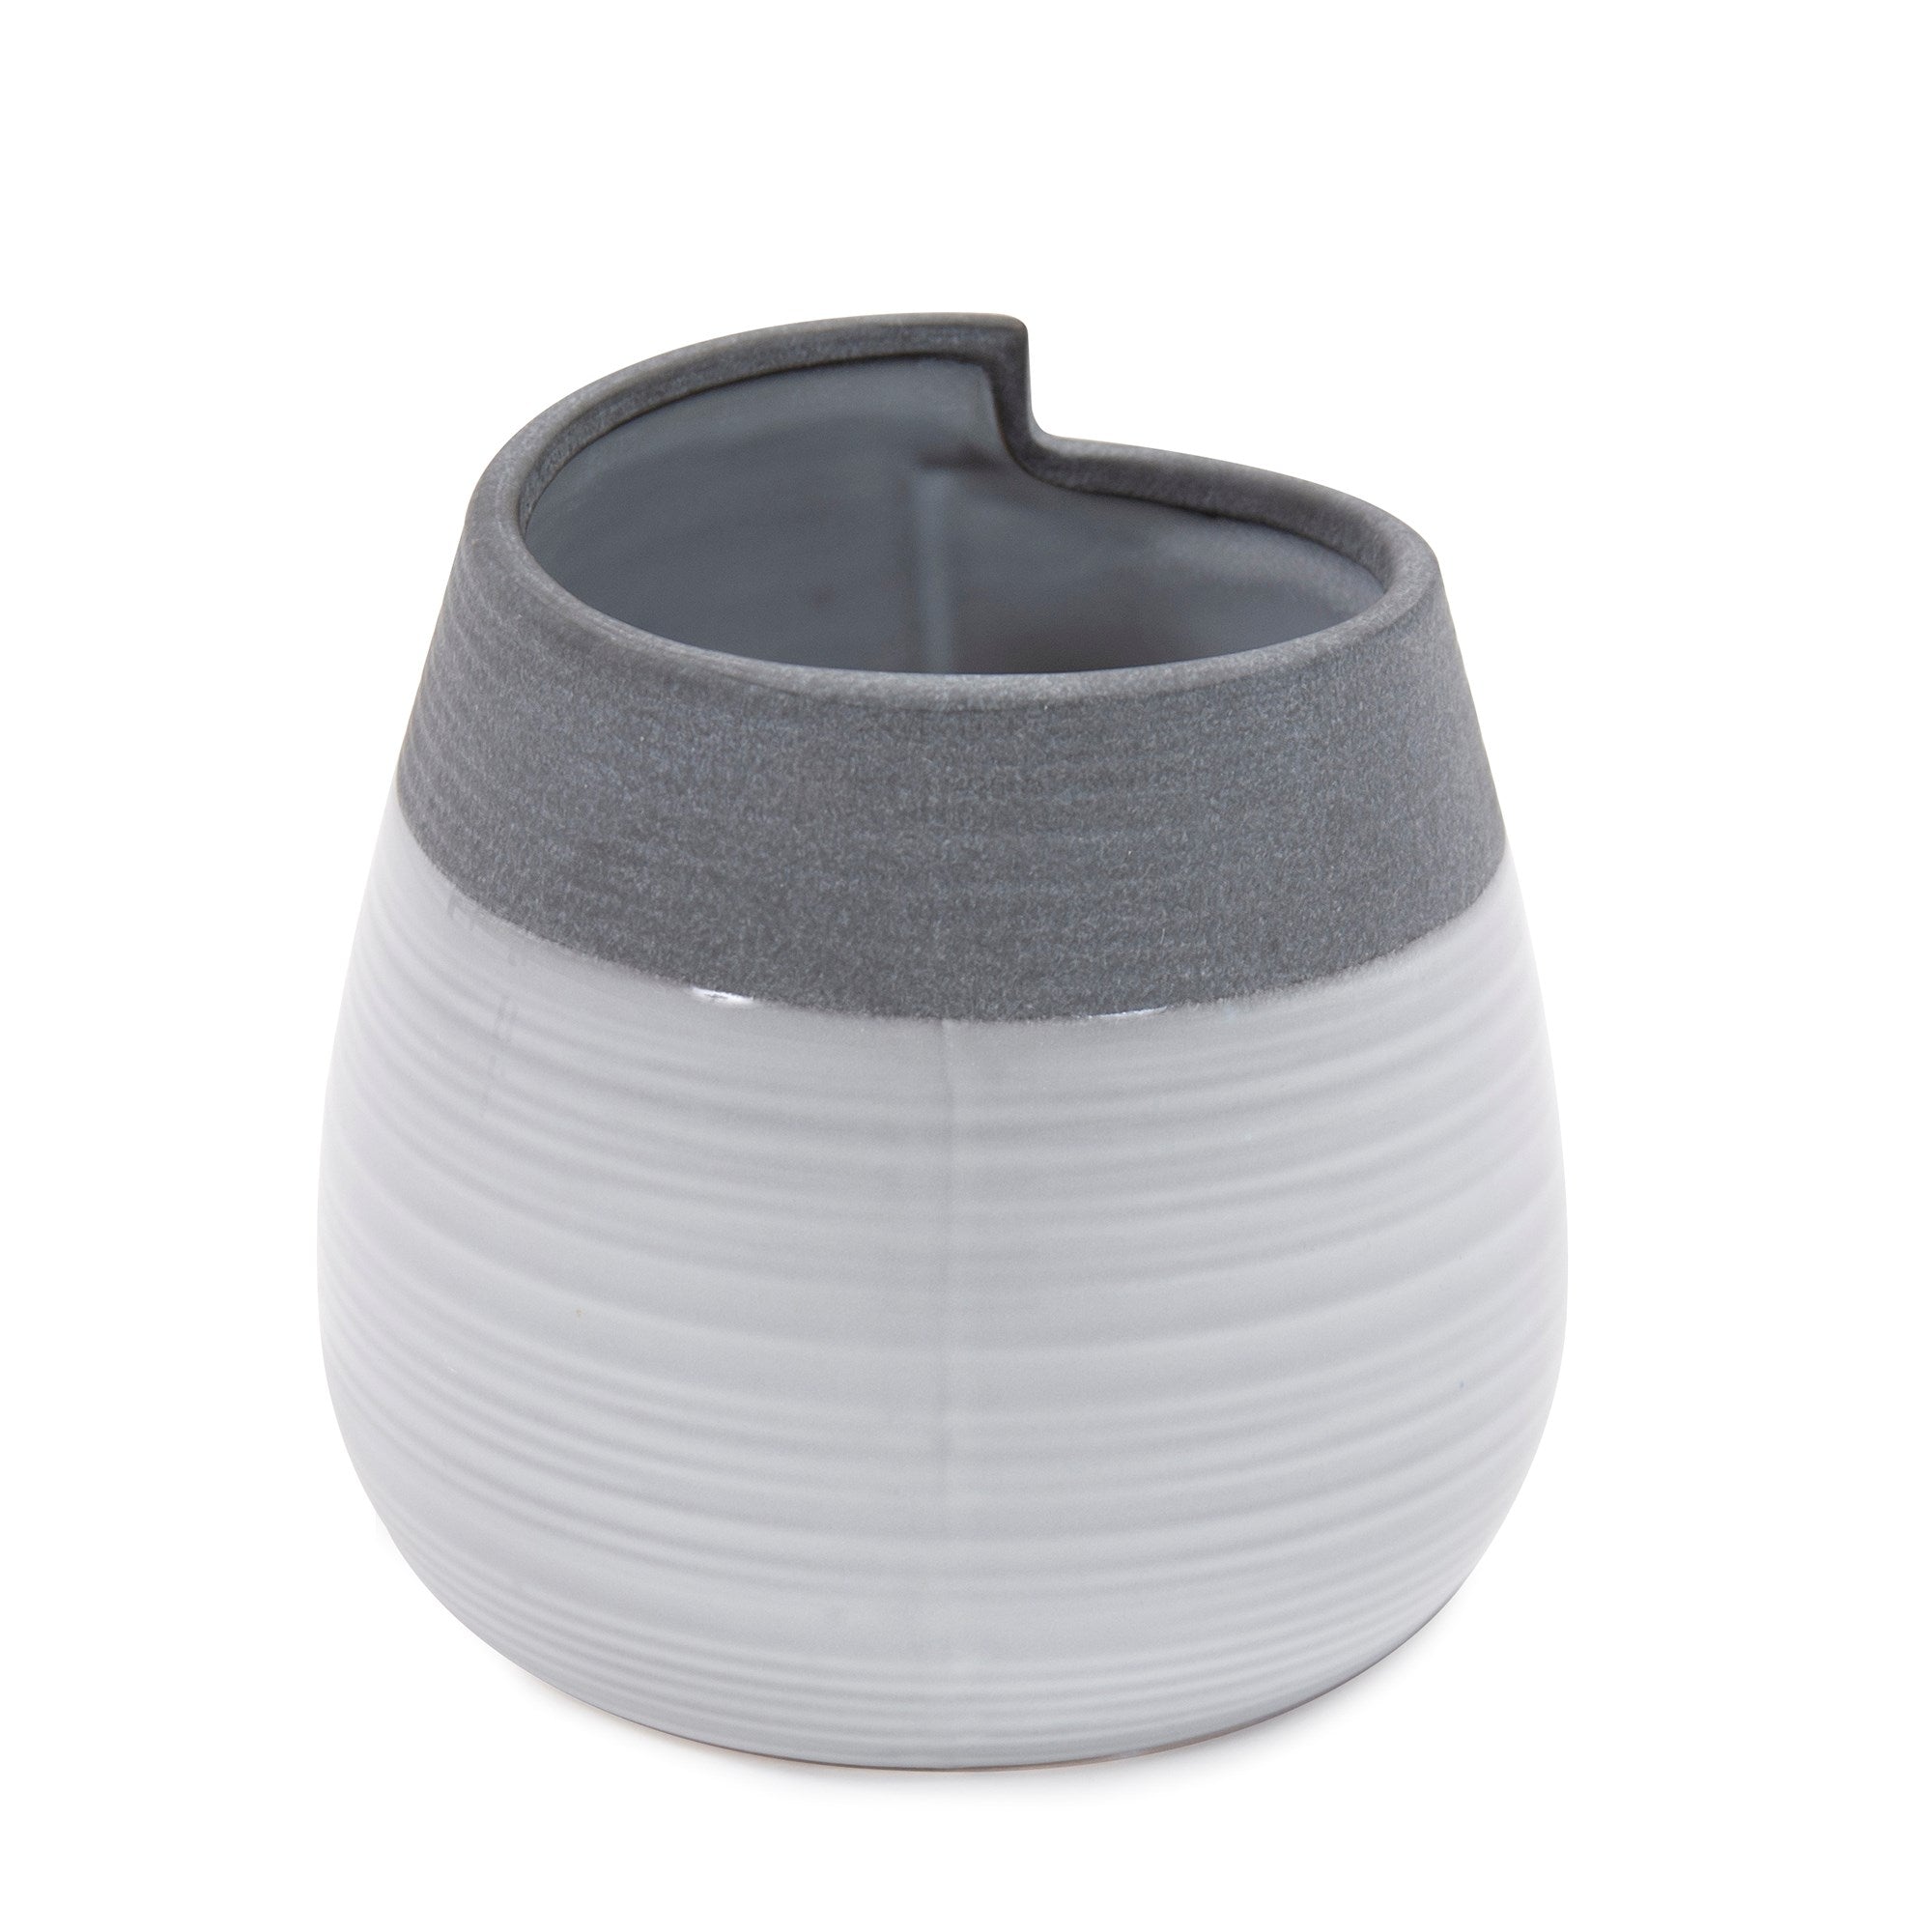 Rolled Two Tone Gray Vase, Small